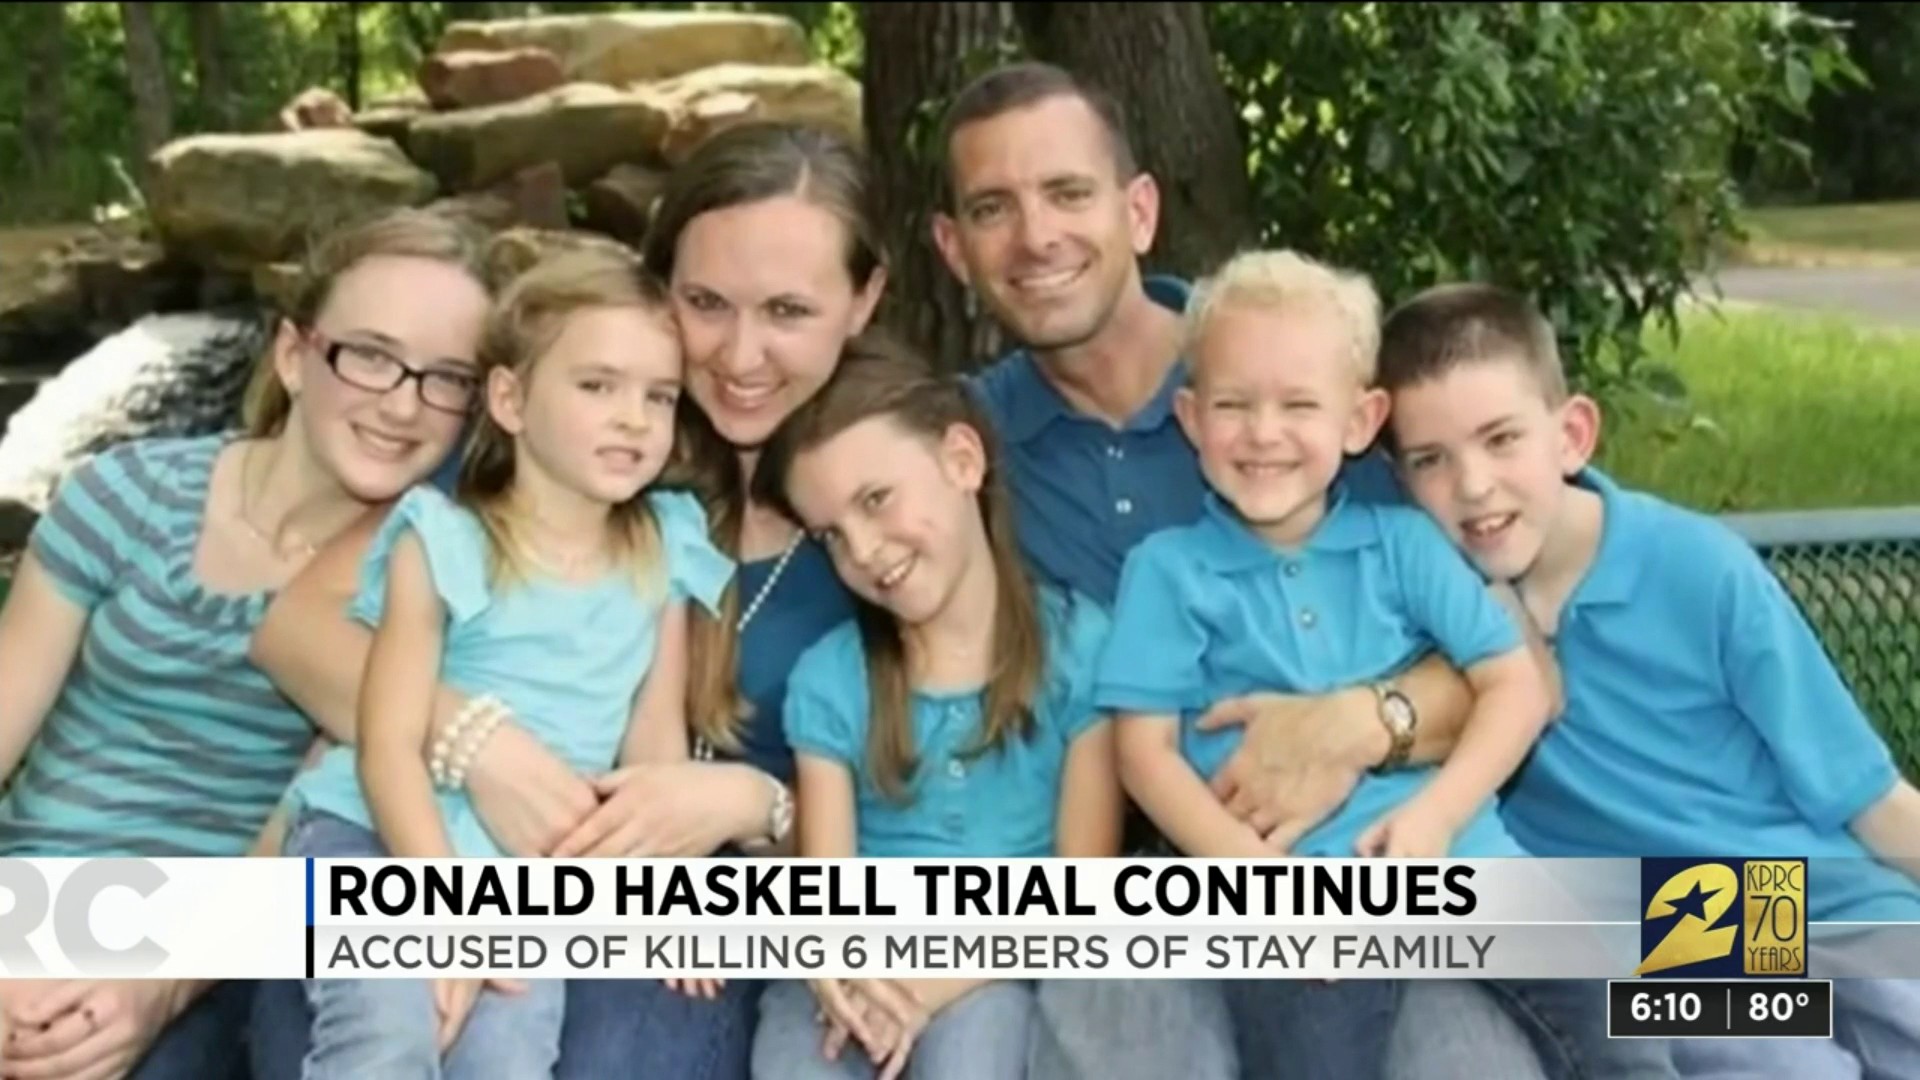 Man who killed 6 members of Stay family sentenced to death